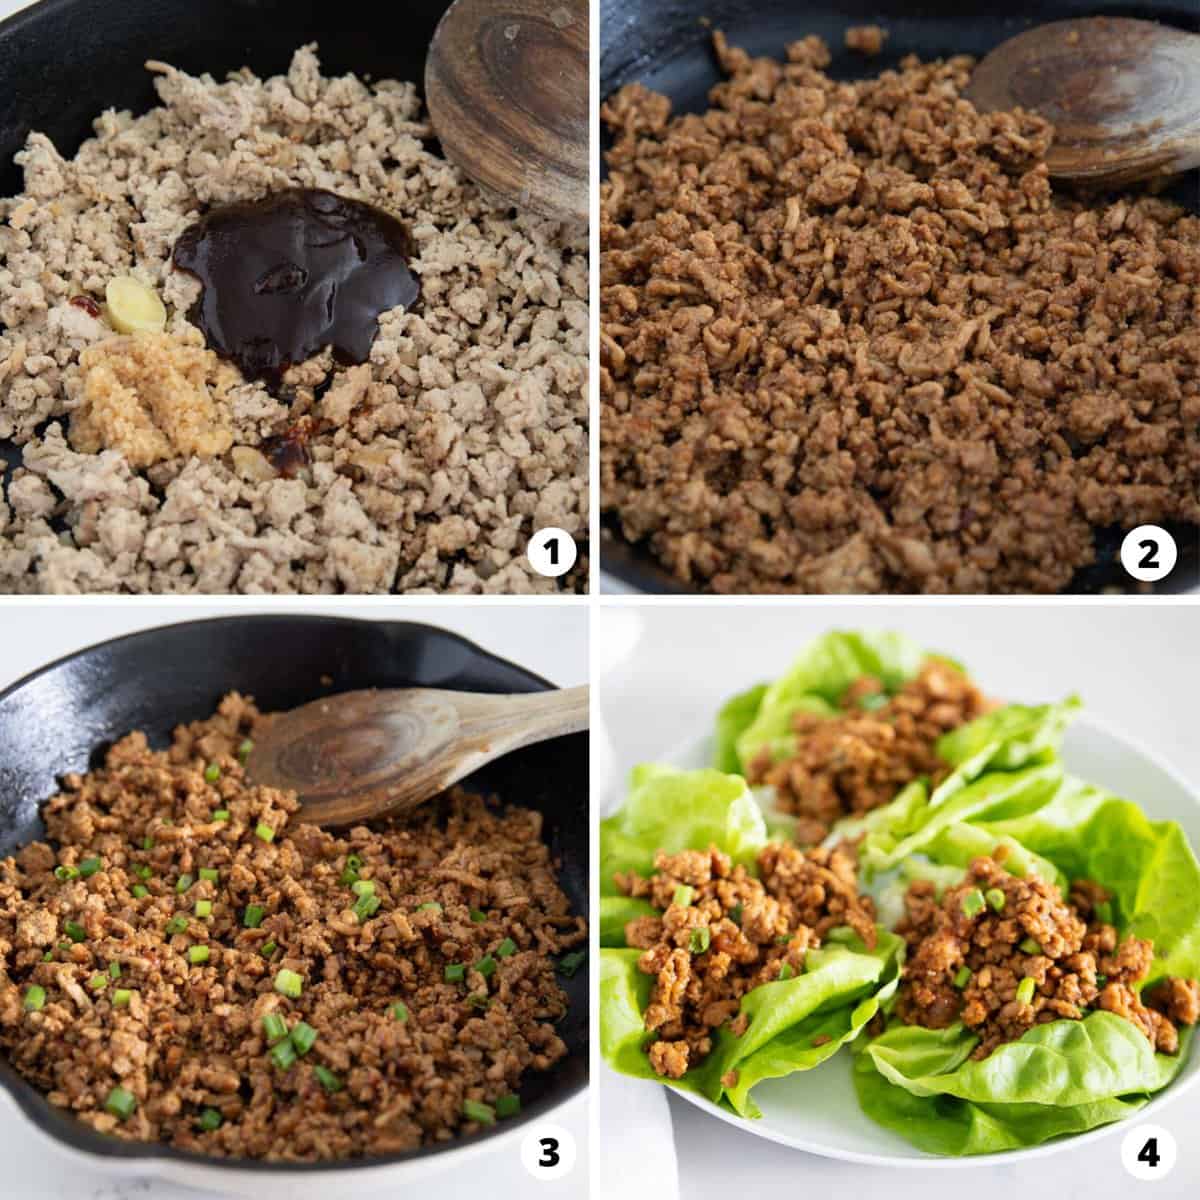 Showing how to make pf changs lettuce wraps in a 4 step collage.